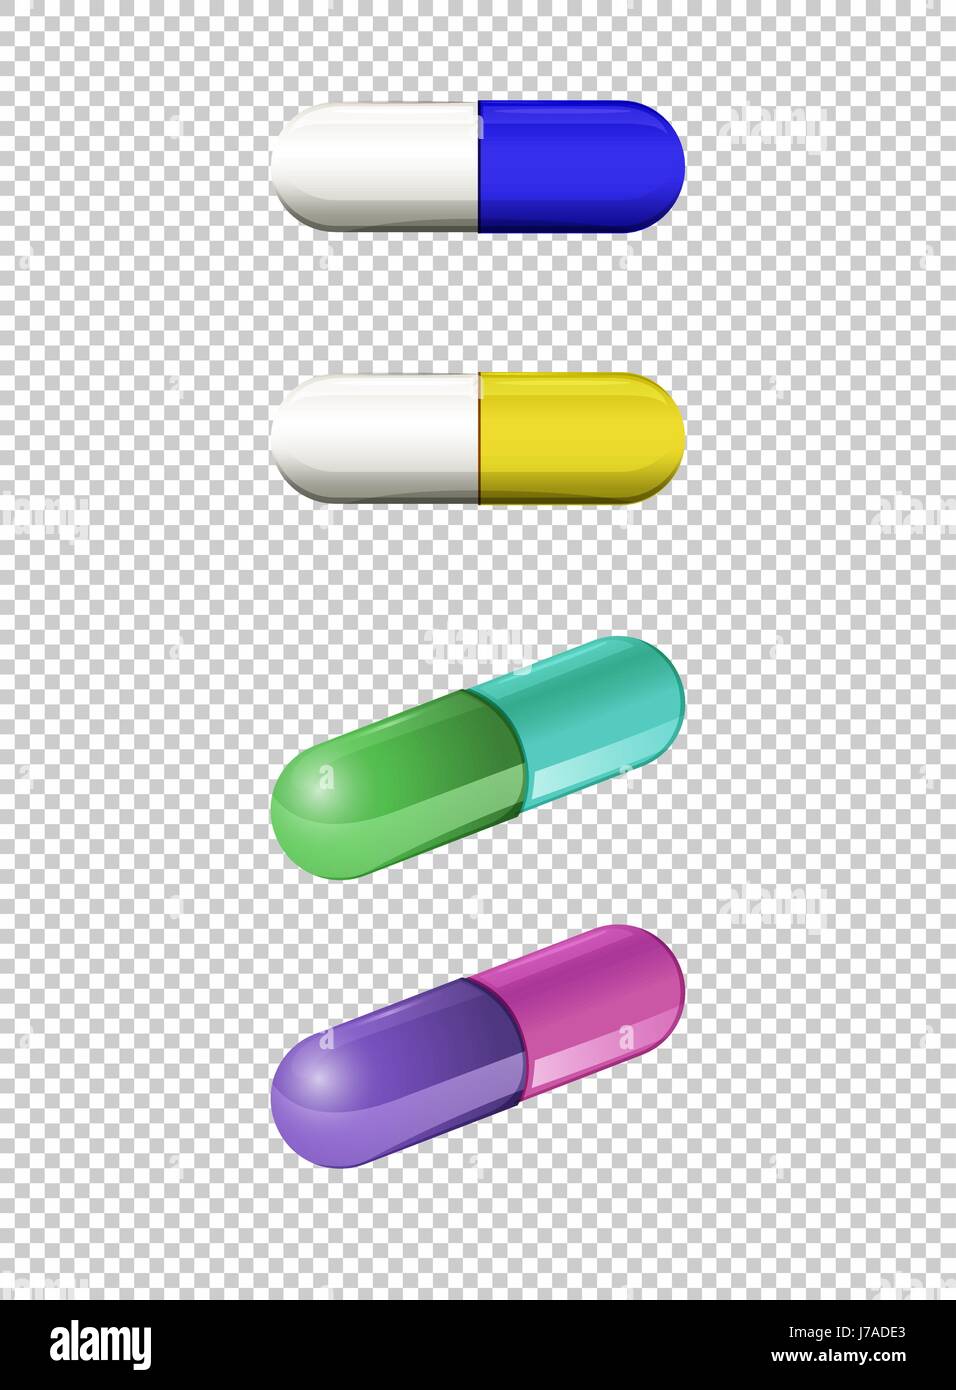 Capsules in different colors illustration Stock Vector